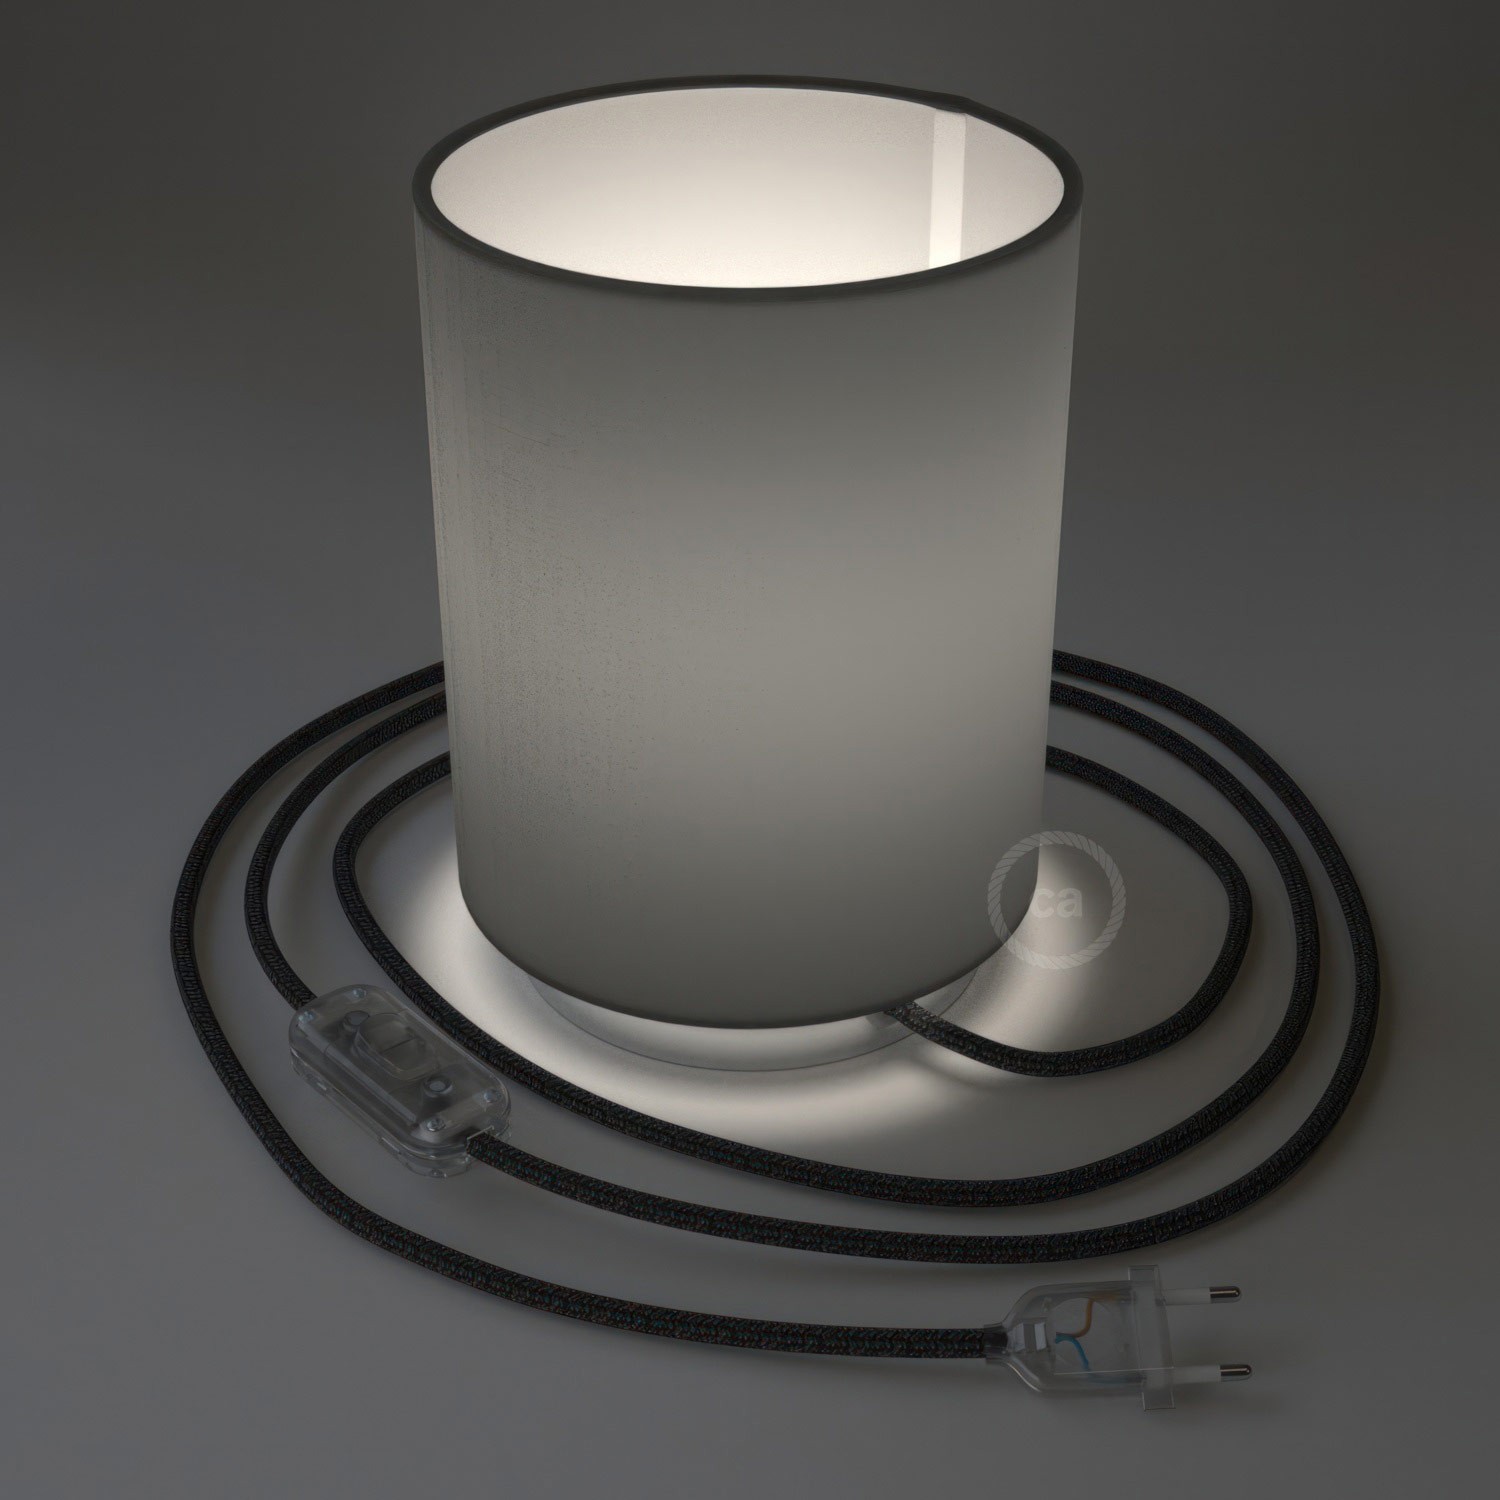 Posaluce in metal with Penguin Electra Cilindro lampshade, complete with fabric cable, switch and 2-pin plug